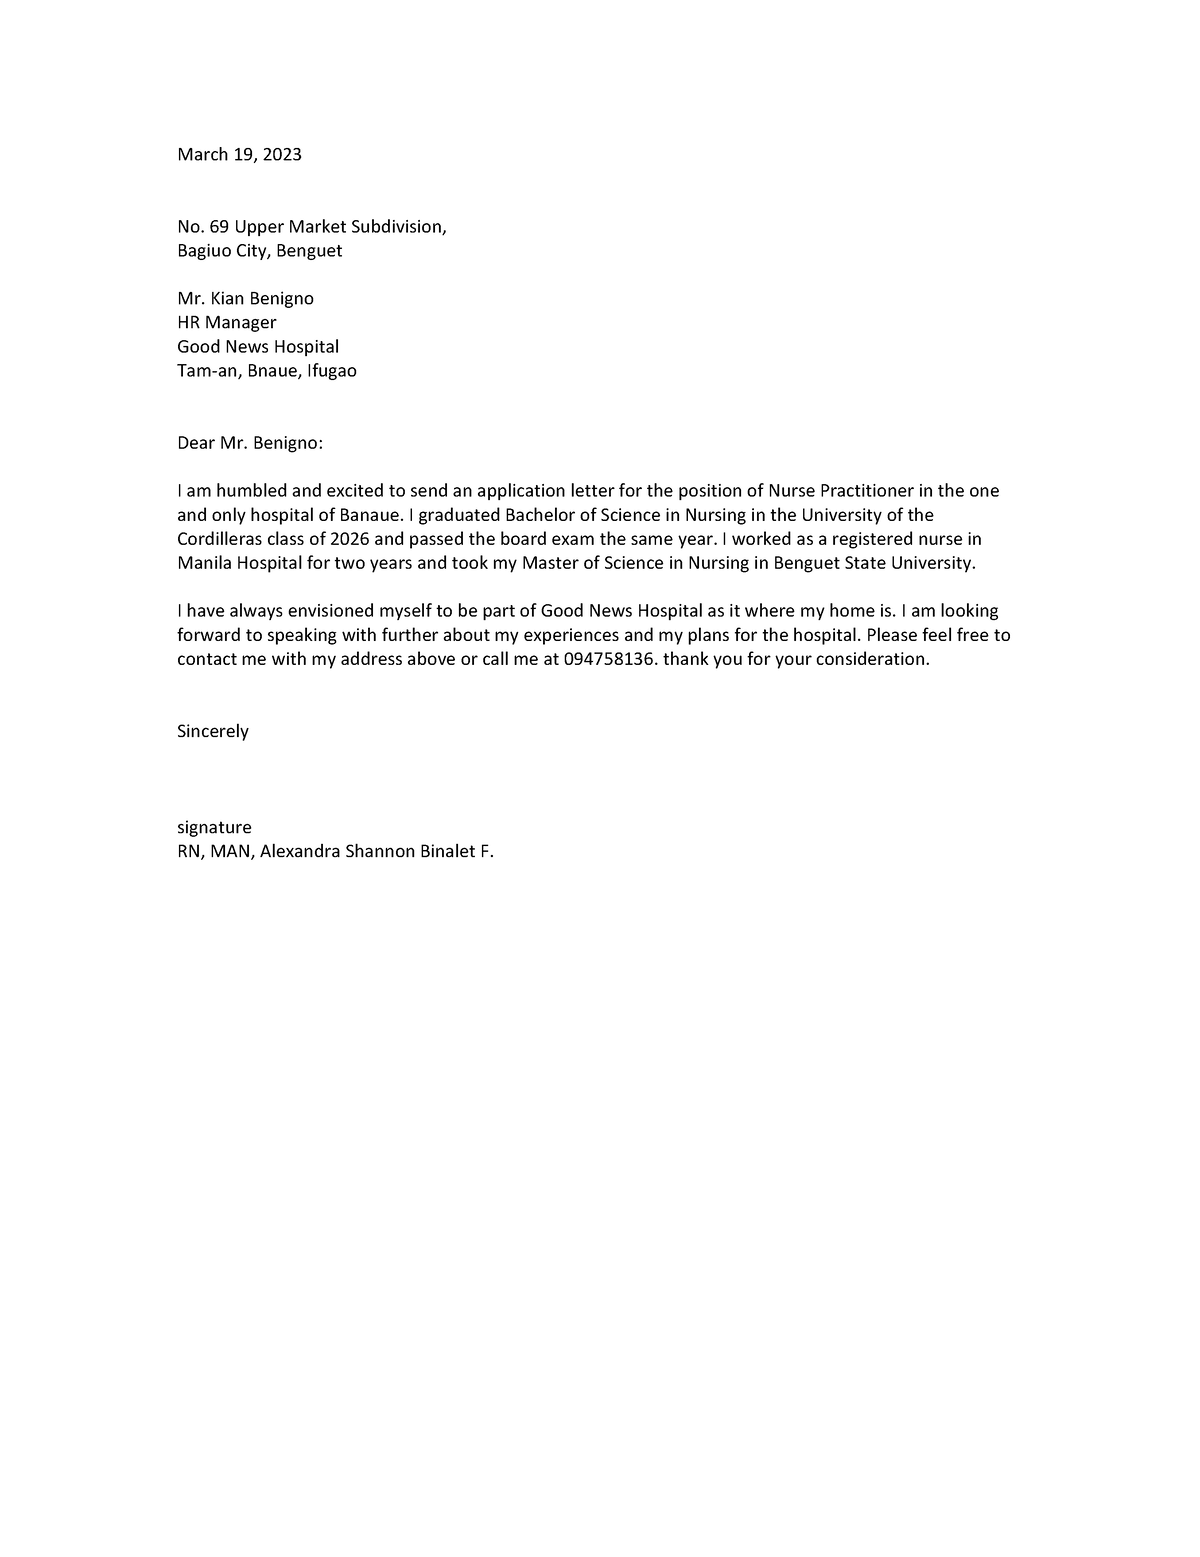 Application letter - example - March 19, 2023 No. 69 Upper Market ...